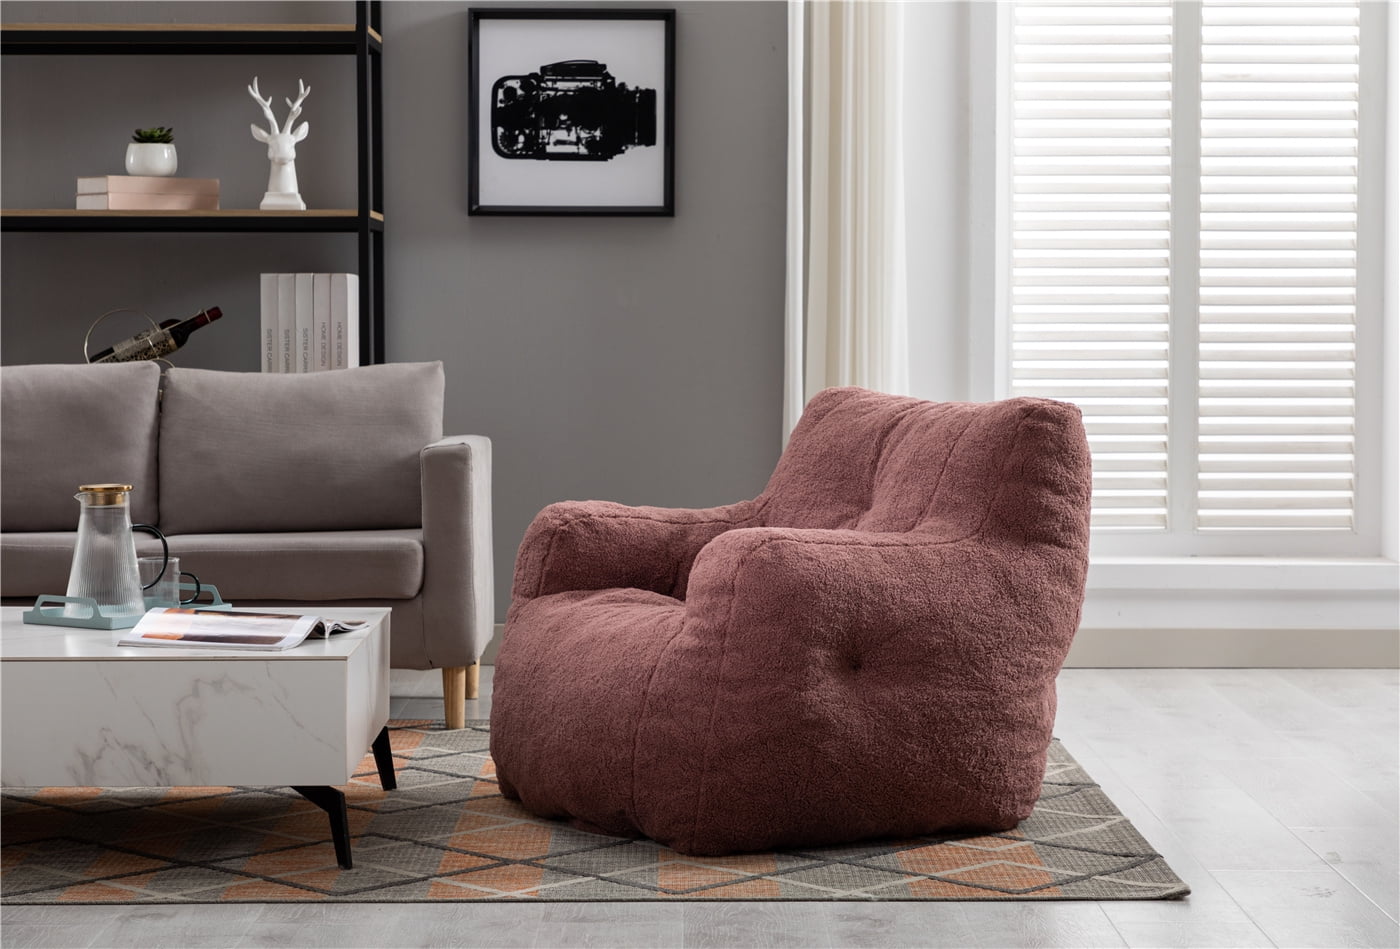 Cvortll Bean Bag Chair with Filler, Bean Bag Sofa with Tufted Soft Stuffed  Filling, Fluffy and Lazy Sofa, Comfy Cozy BeanBag Chairs with Memory Foam